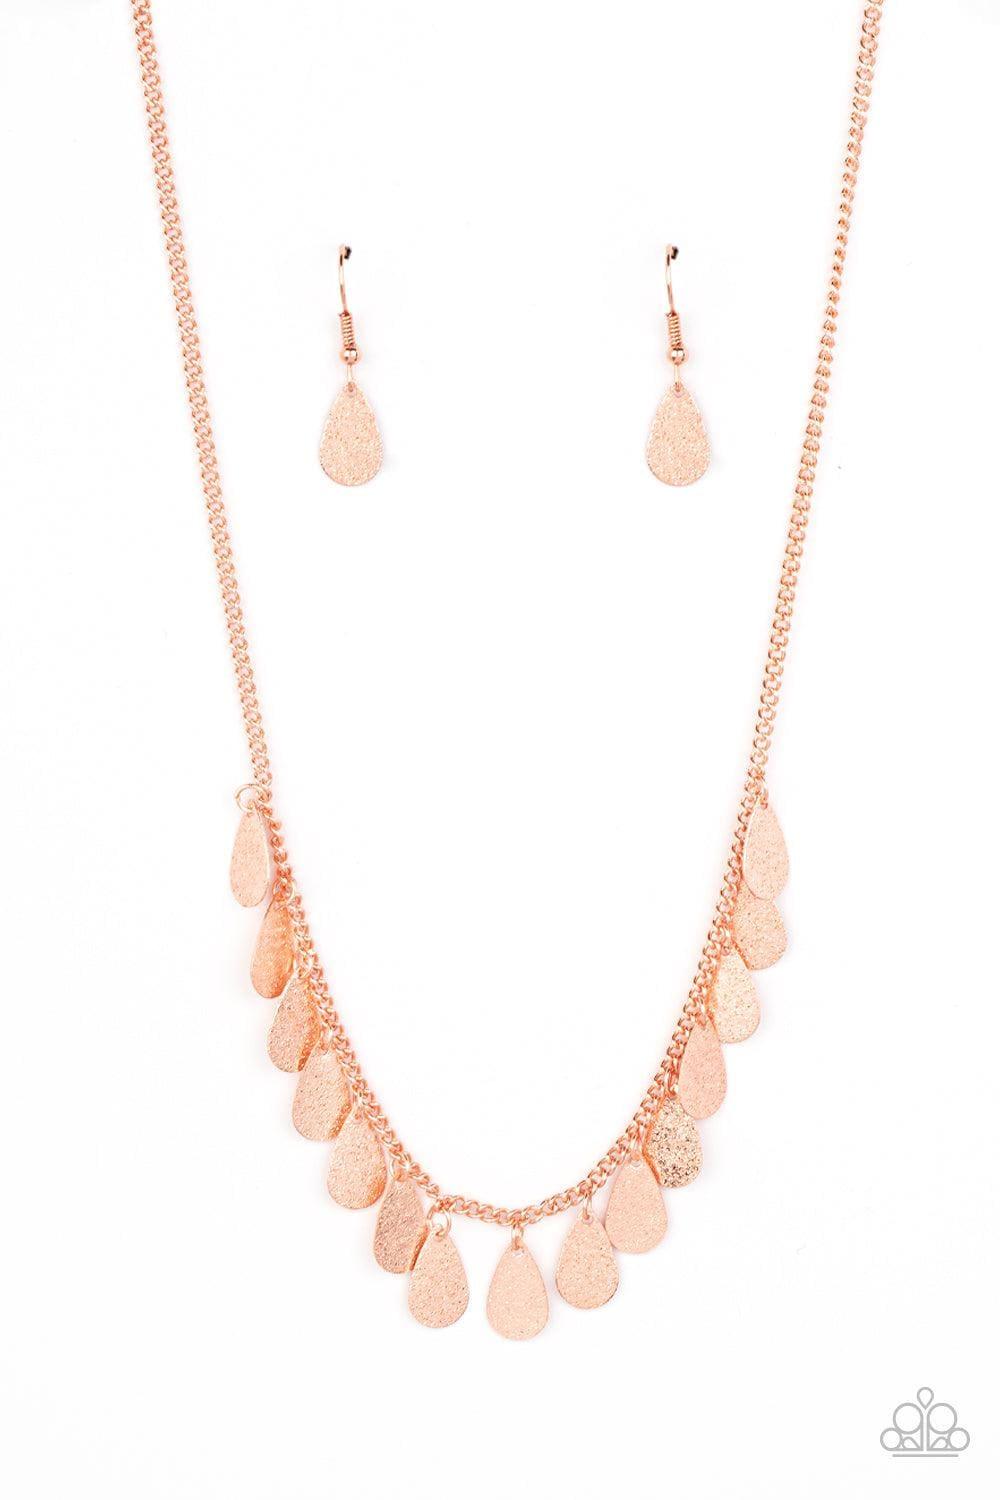 Paparazzi Accessories - Eastern Chime Zone - Copper Necklace - Bling by JessieK